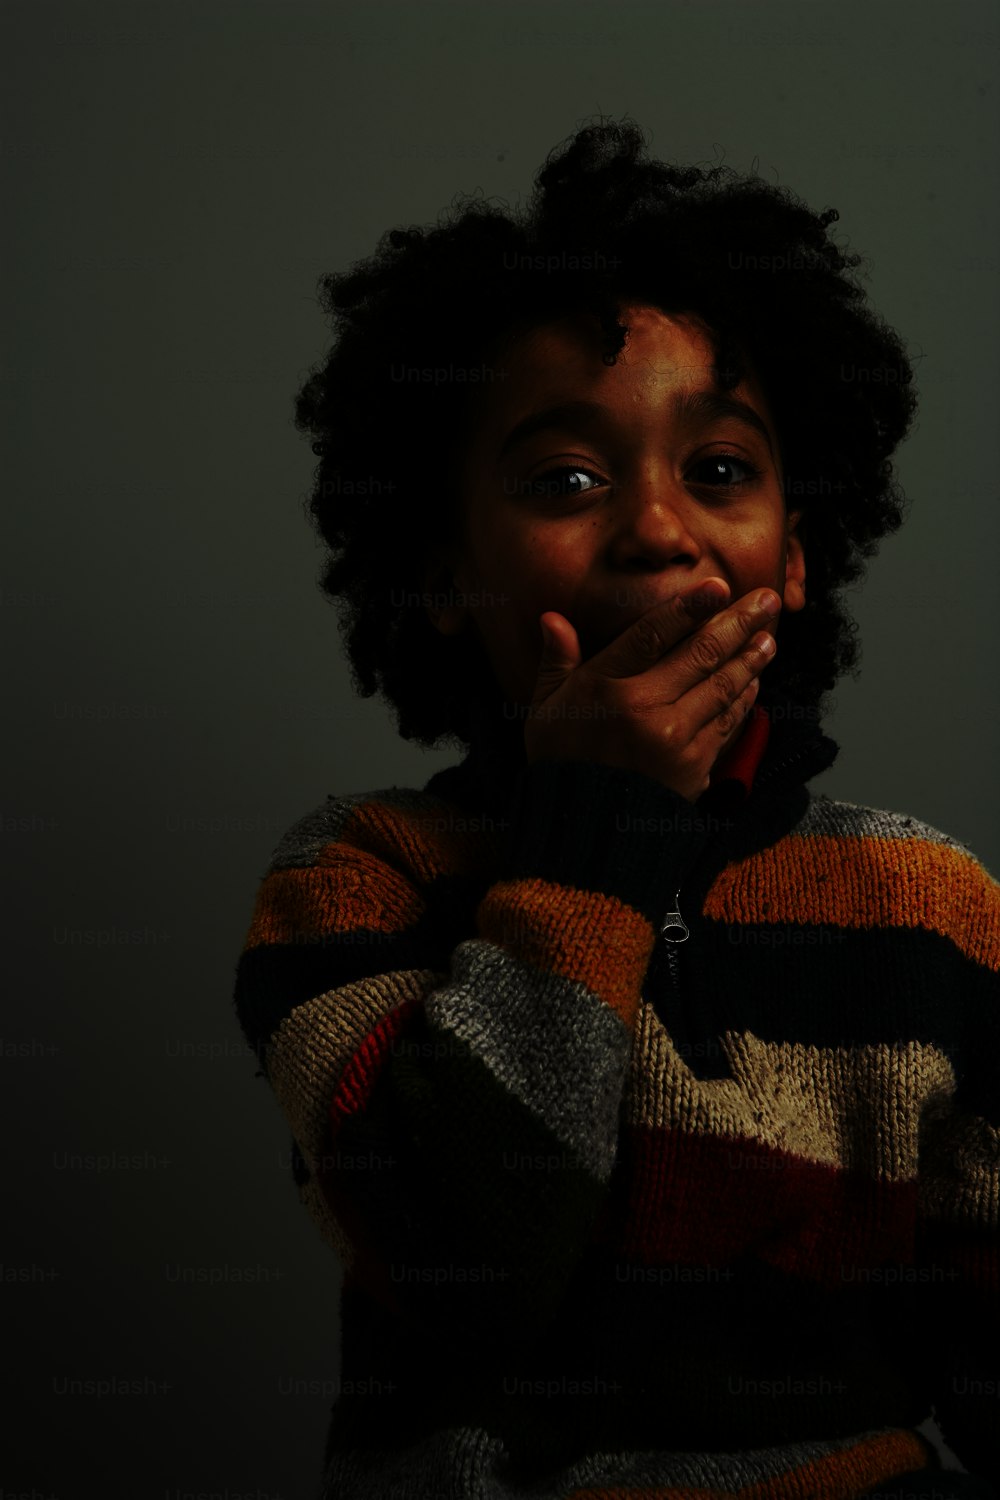 a young boy covers his mouth with his hands